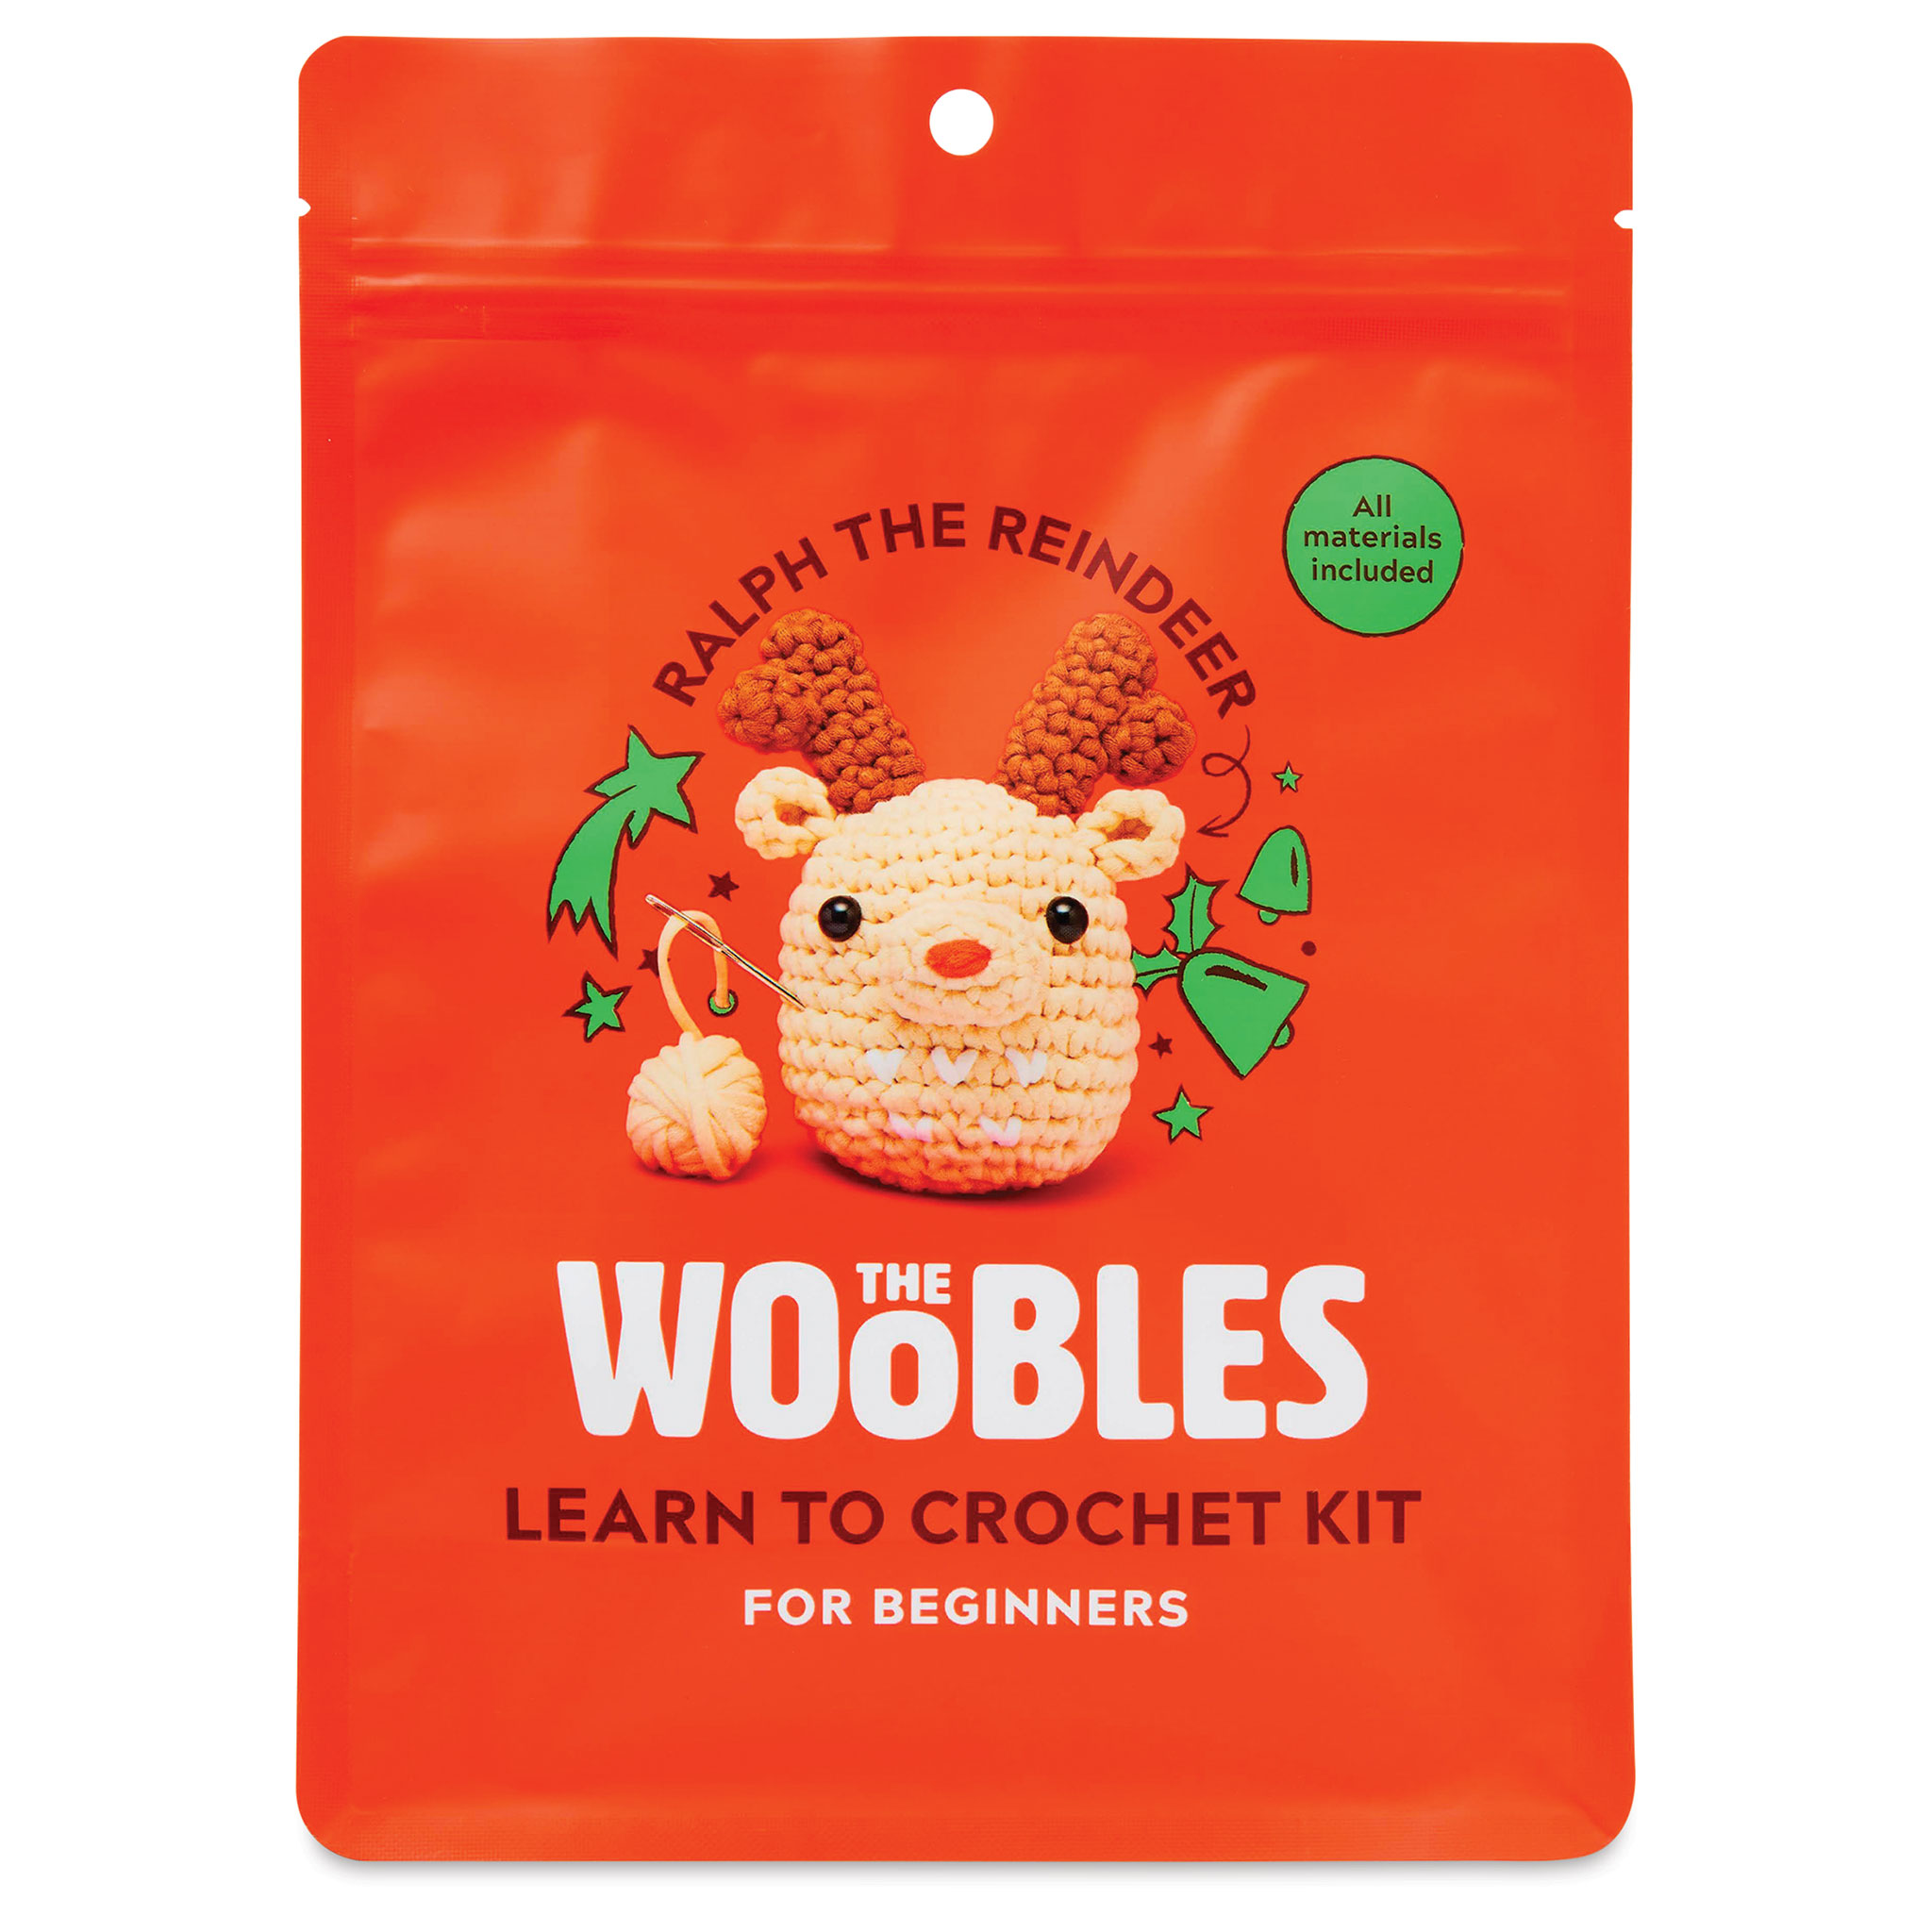 The Woobles Crochet Kit Ralph the Reindeer Learn To DIY Beginners Christmas